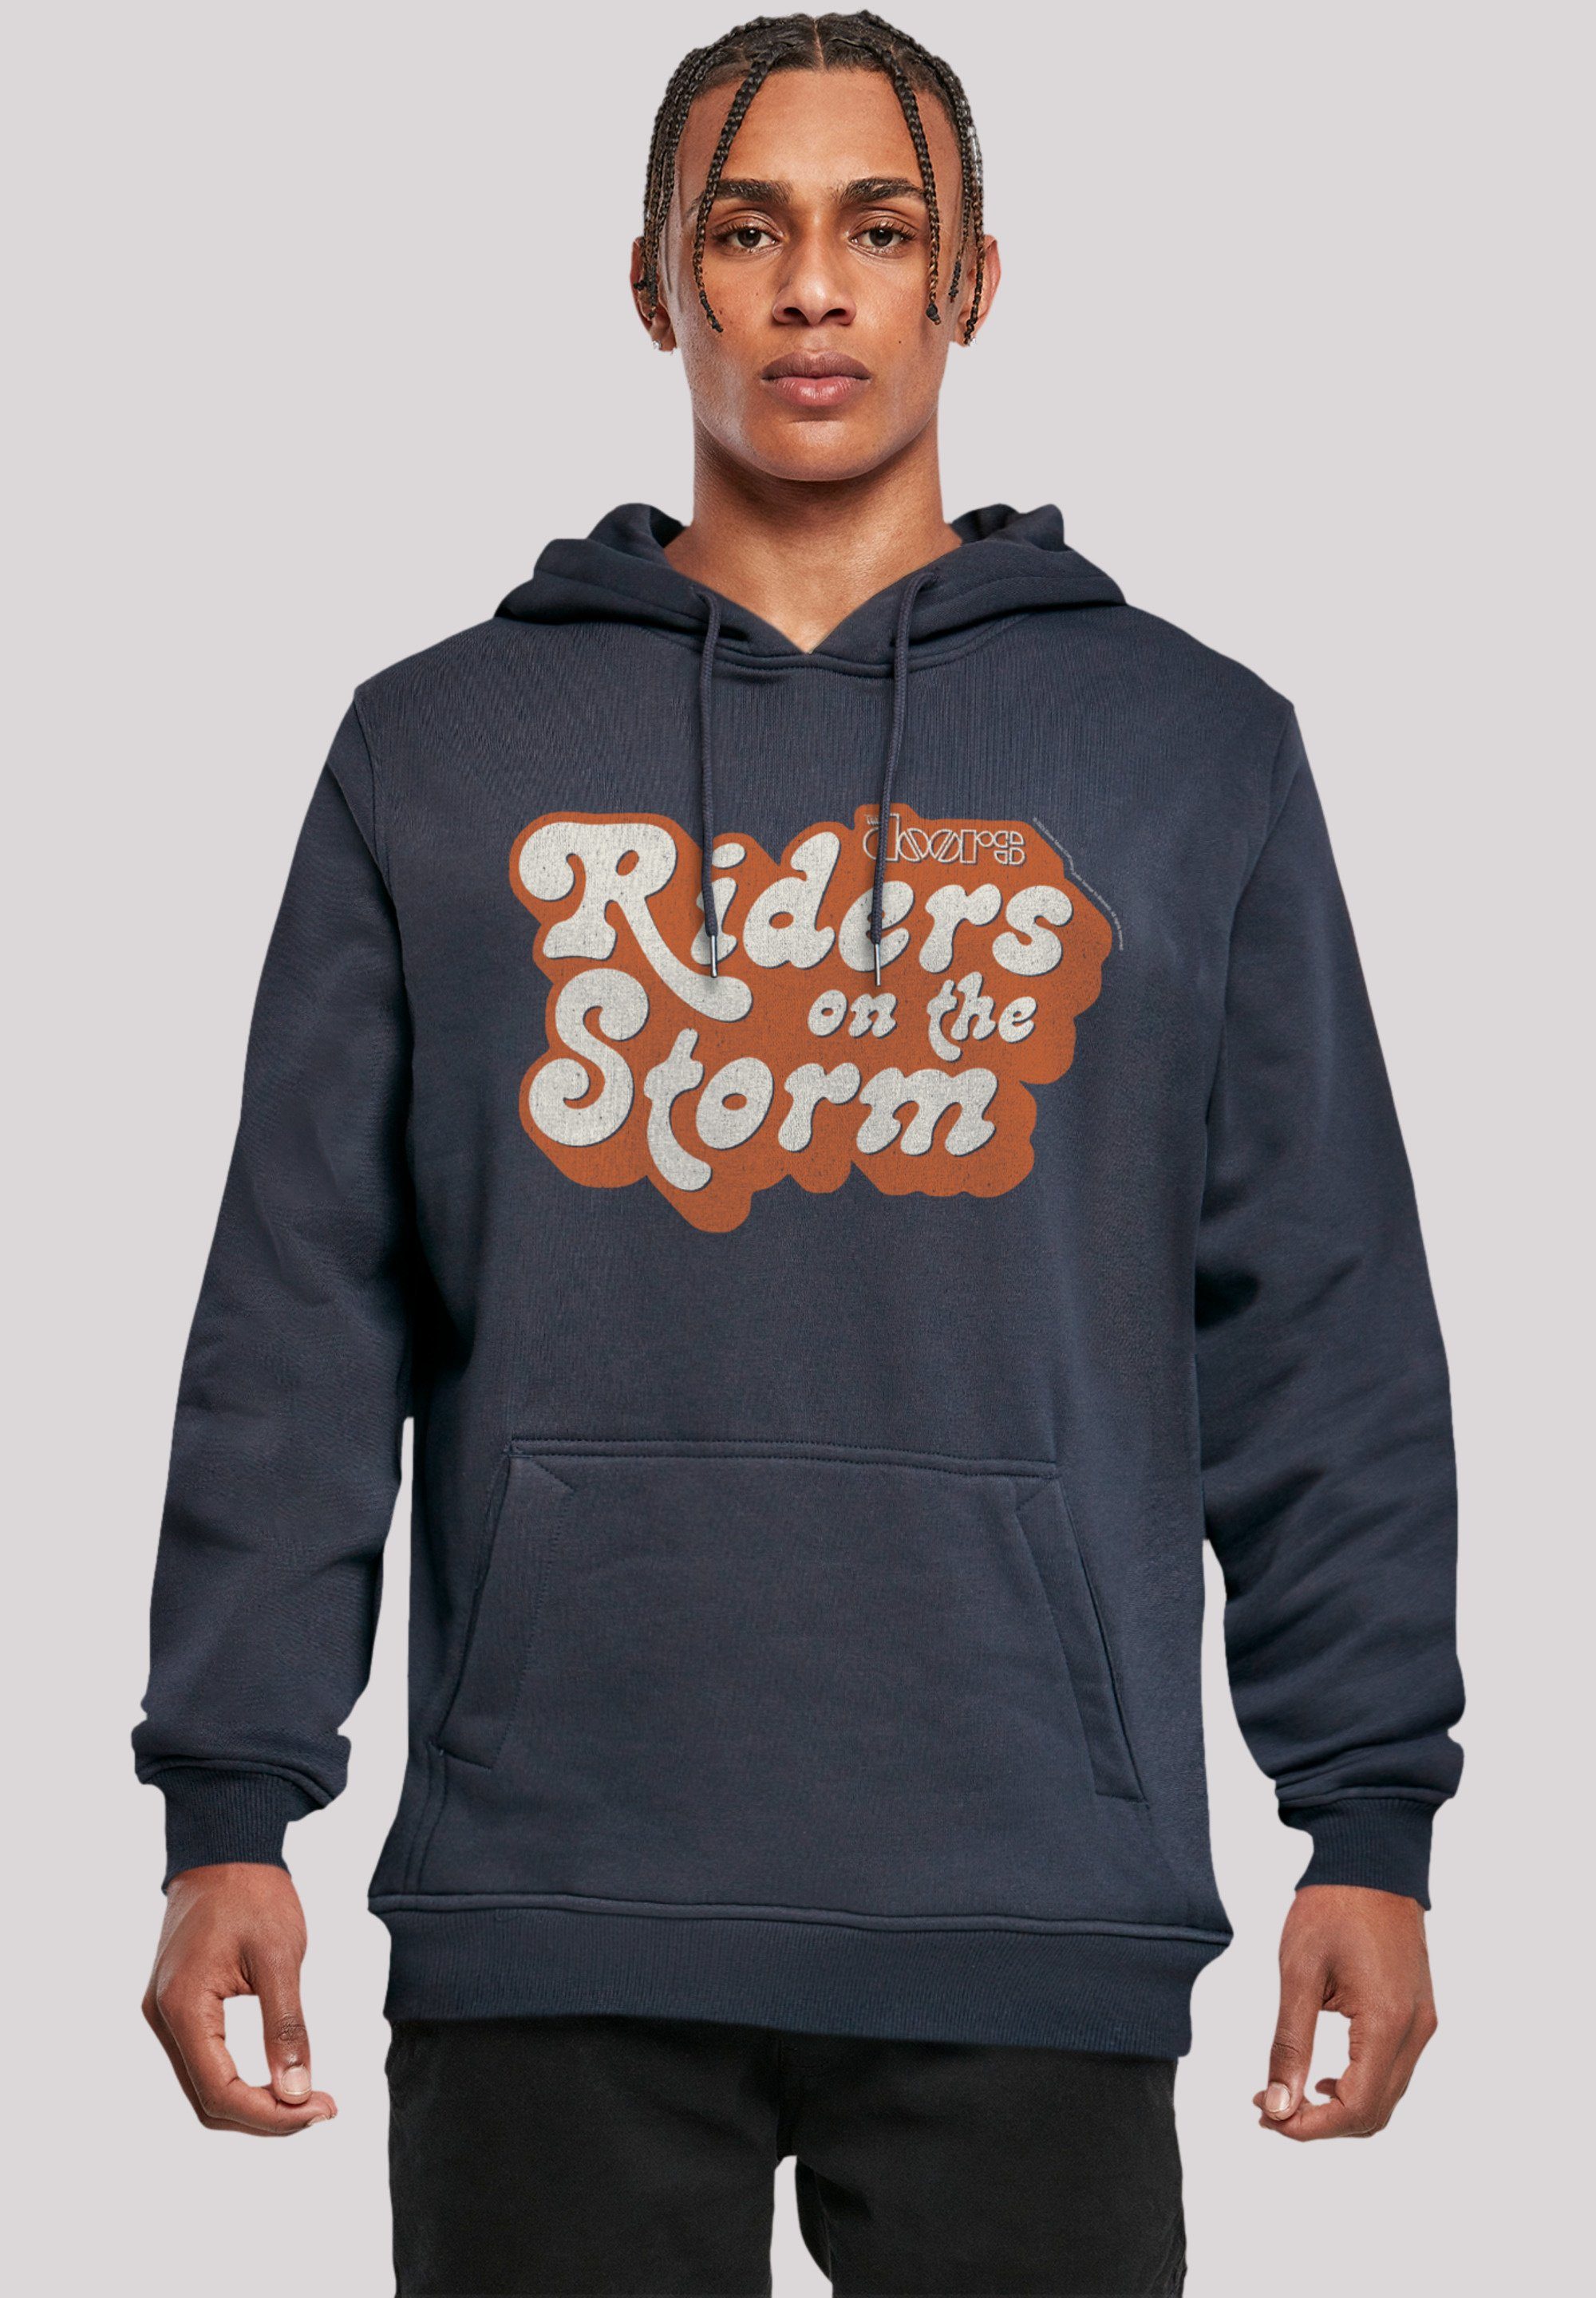 F4NT4STIC Hoodie The Doors navy Band on Music Band, Storm Premium Qualität, Logo Riders the Logo